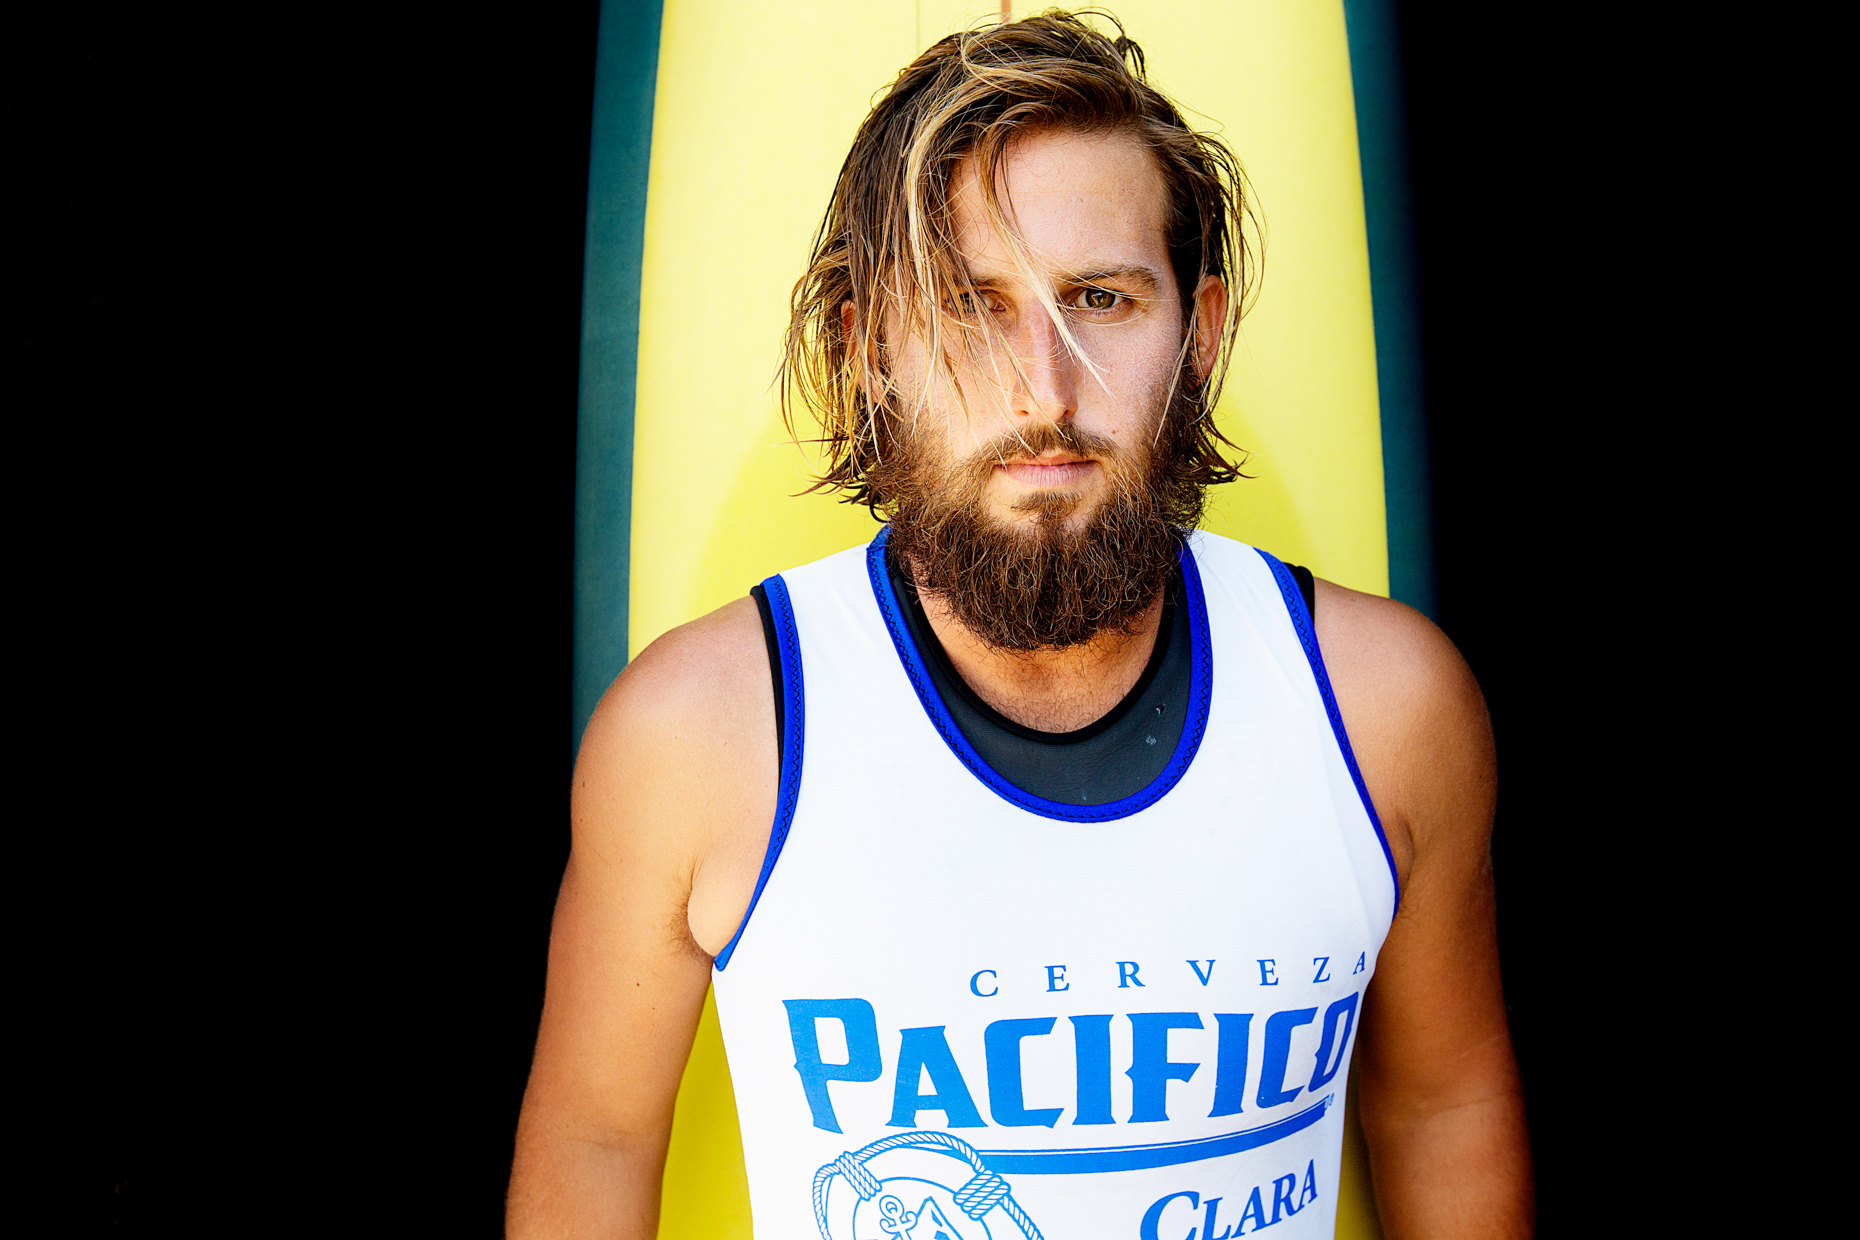 Justin Quintal for Pacifico by Boston based commercial portrait photographer Brian Nevins